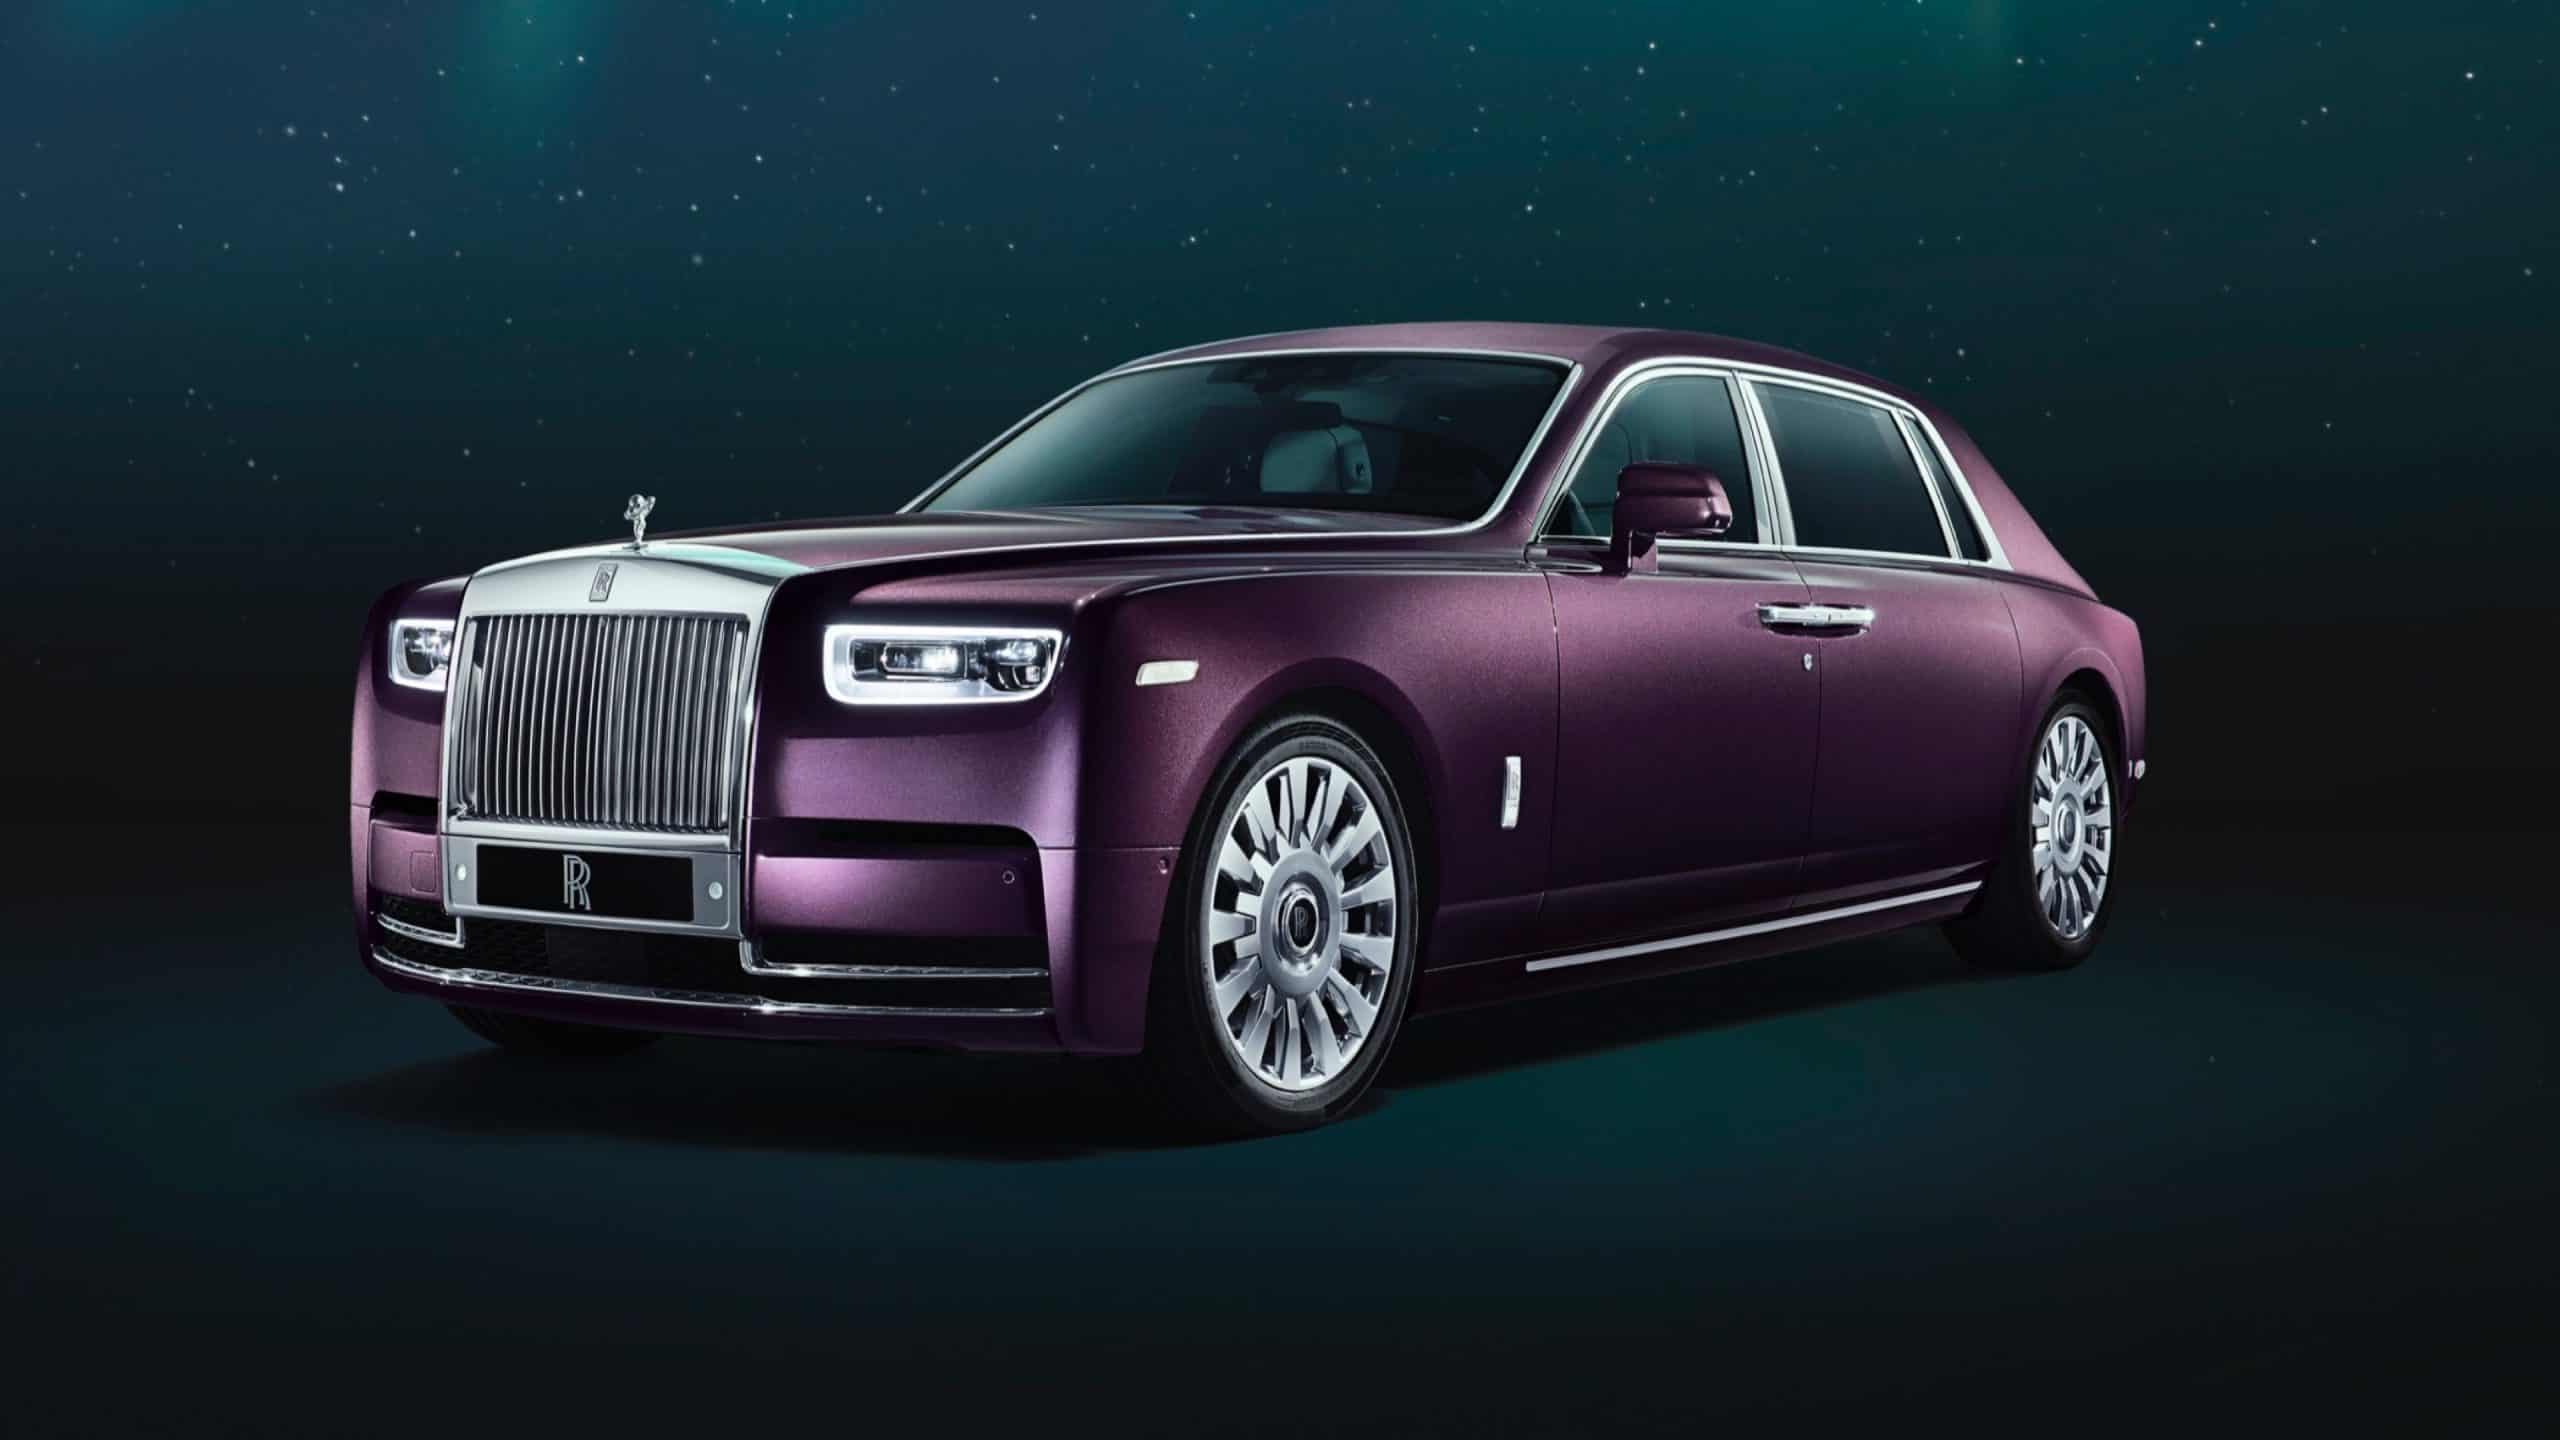 TrendMantra rolls-royce-phantom-swb-discover-hero-d-scaled 10 Ultra Luxury Cars That Defy "Money Can't Buy Happiness" Adage 